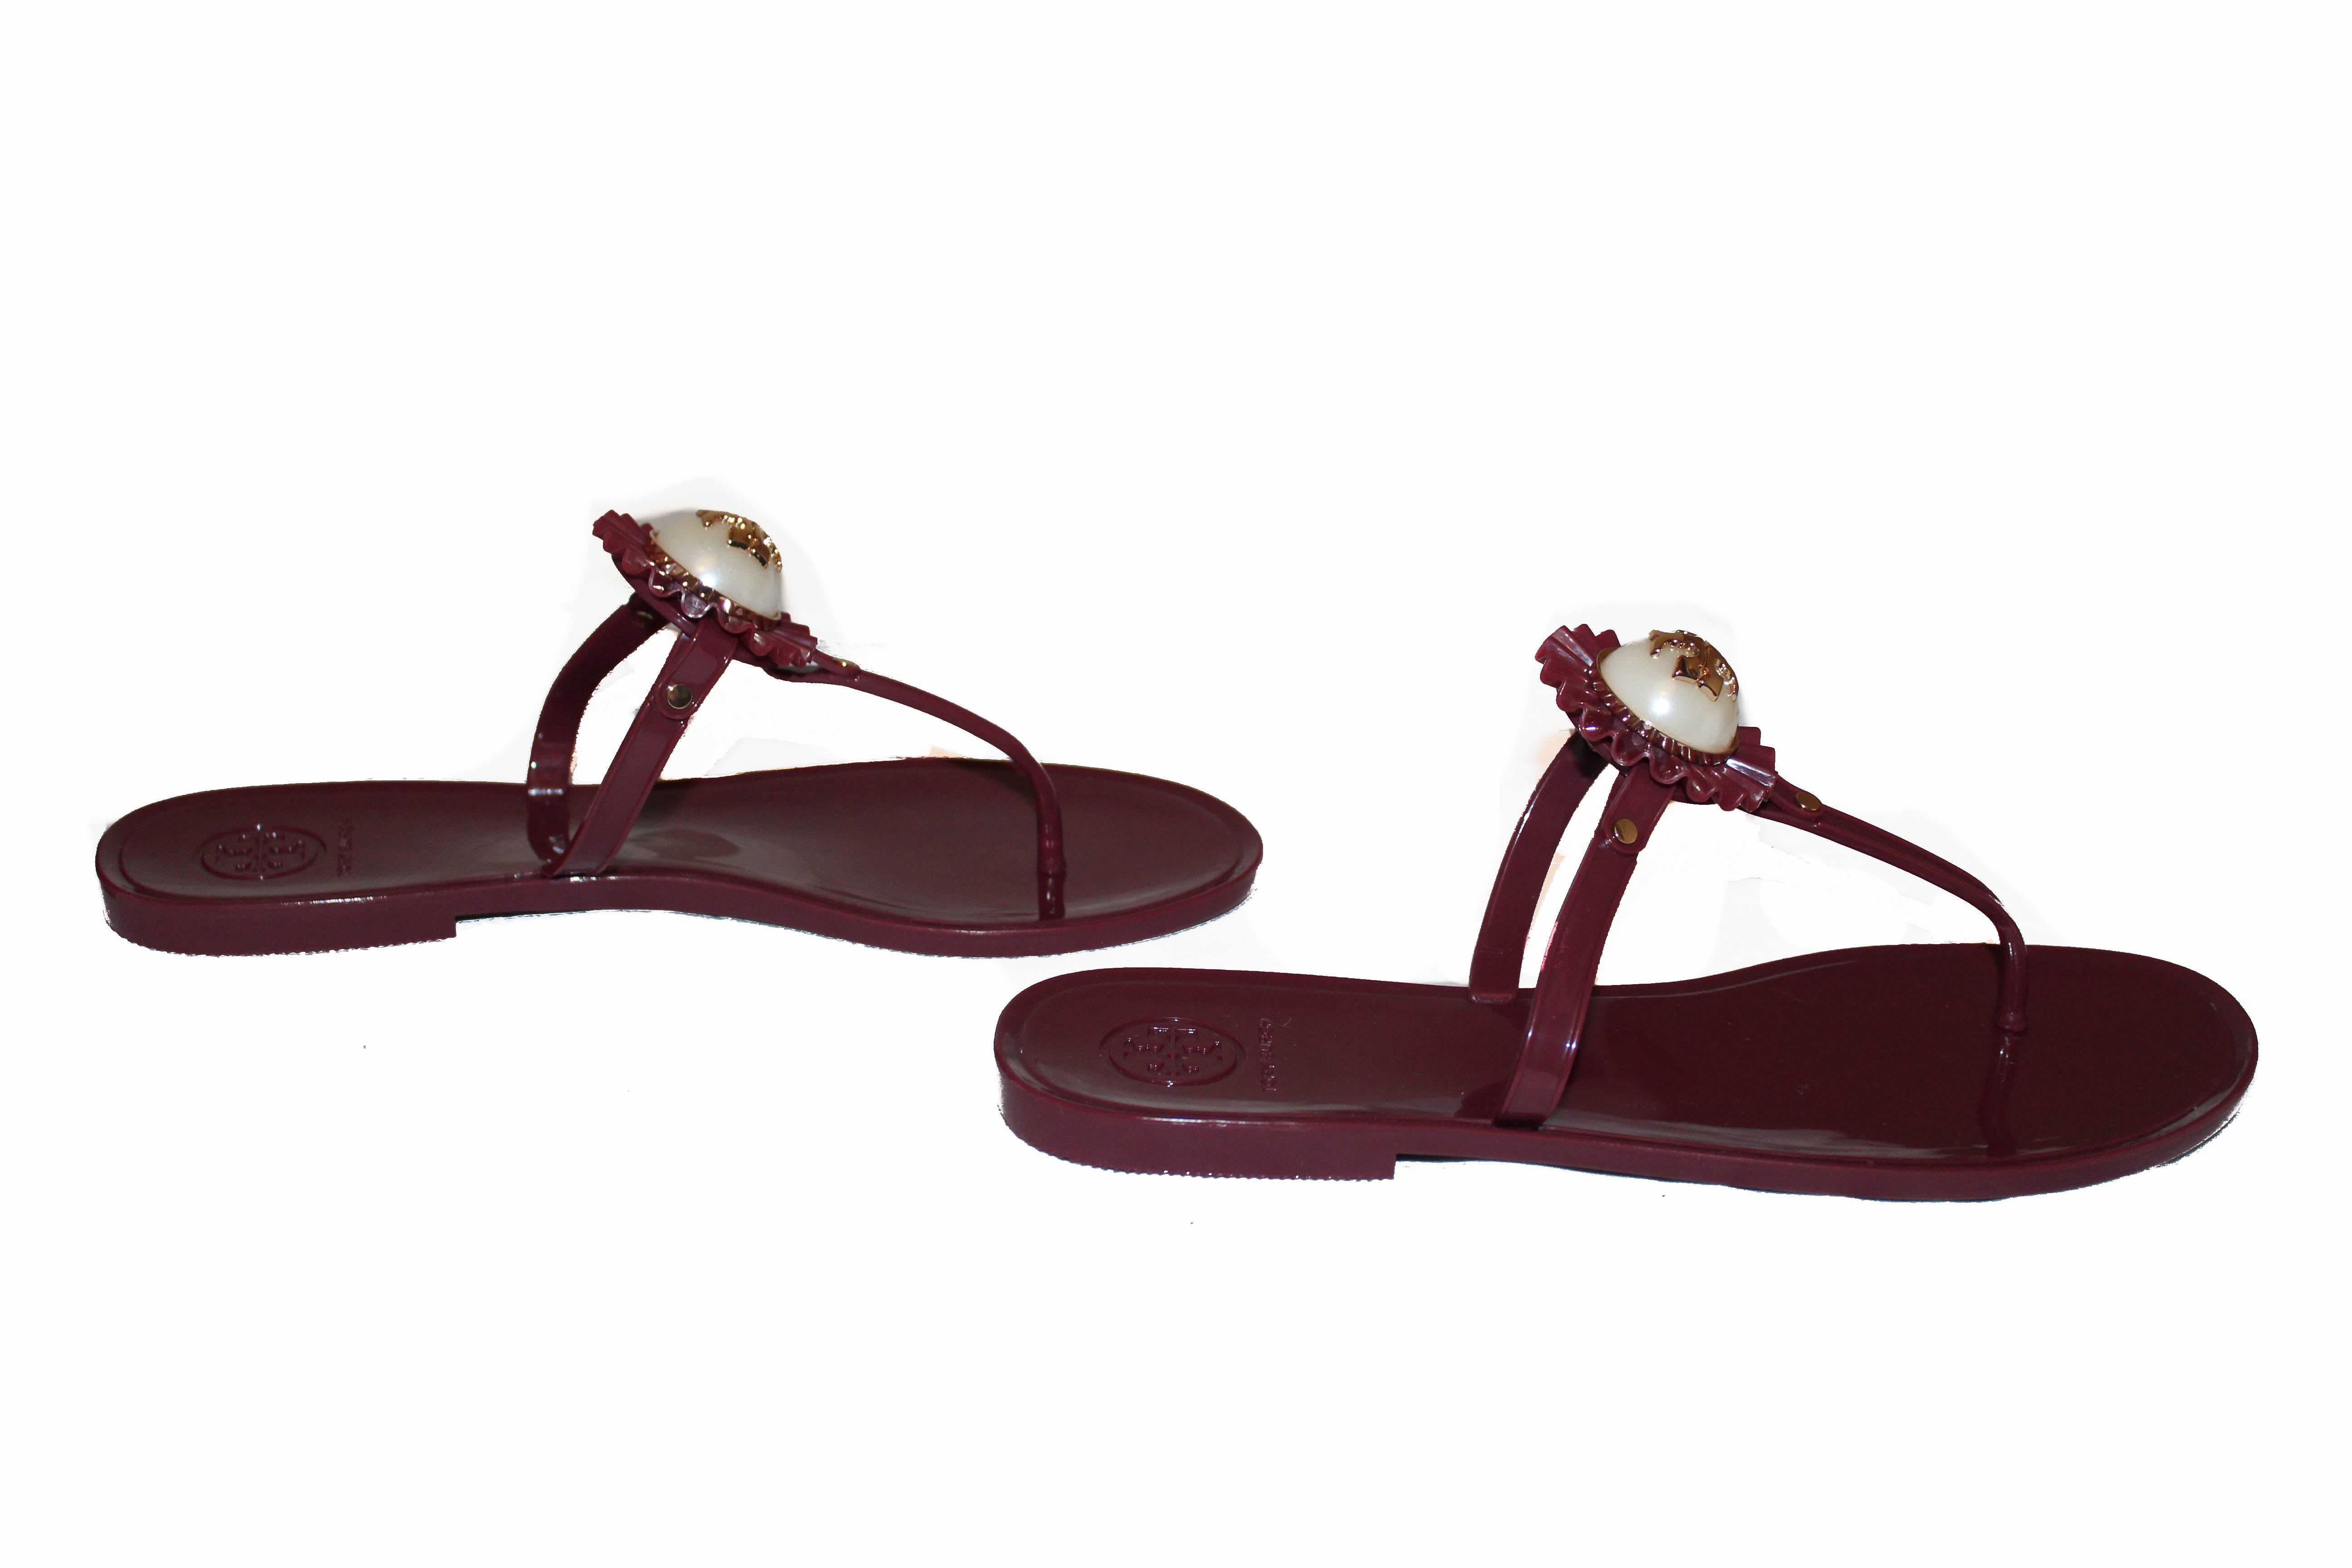 Authentic Tory Burch Burgundy Jelly Sandal Size 7M